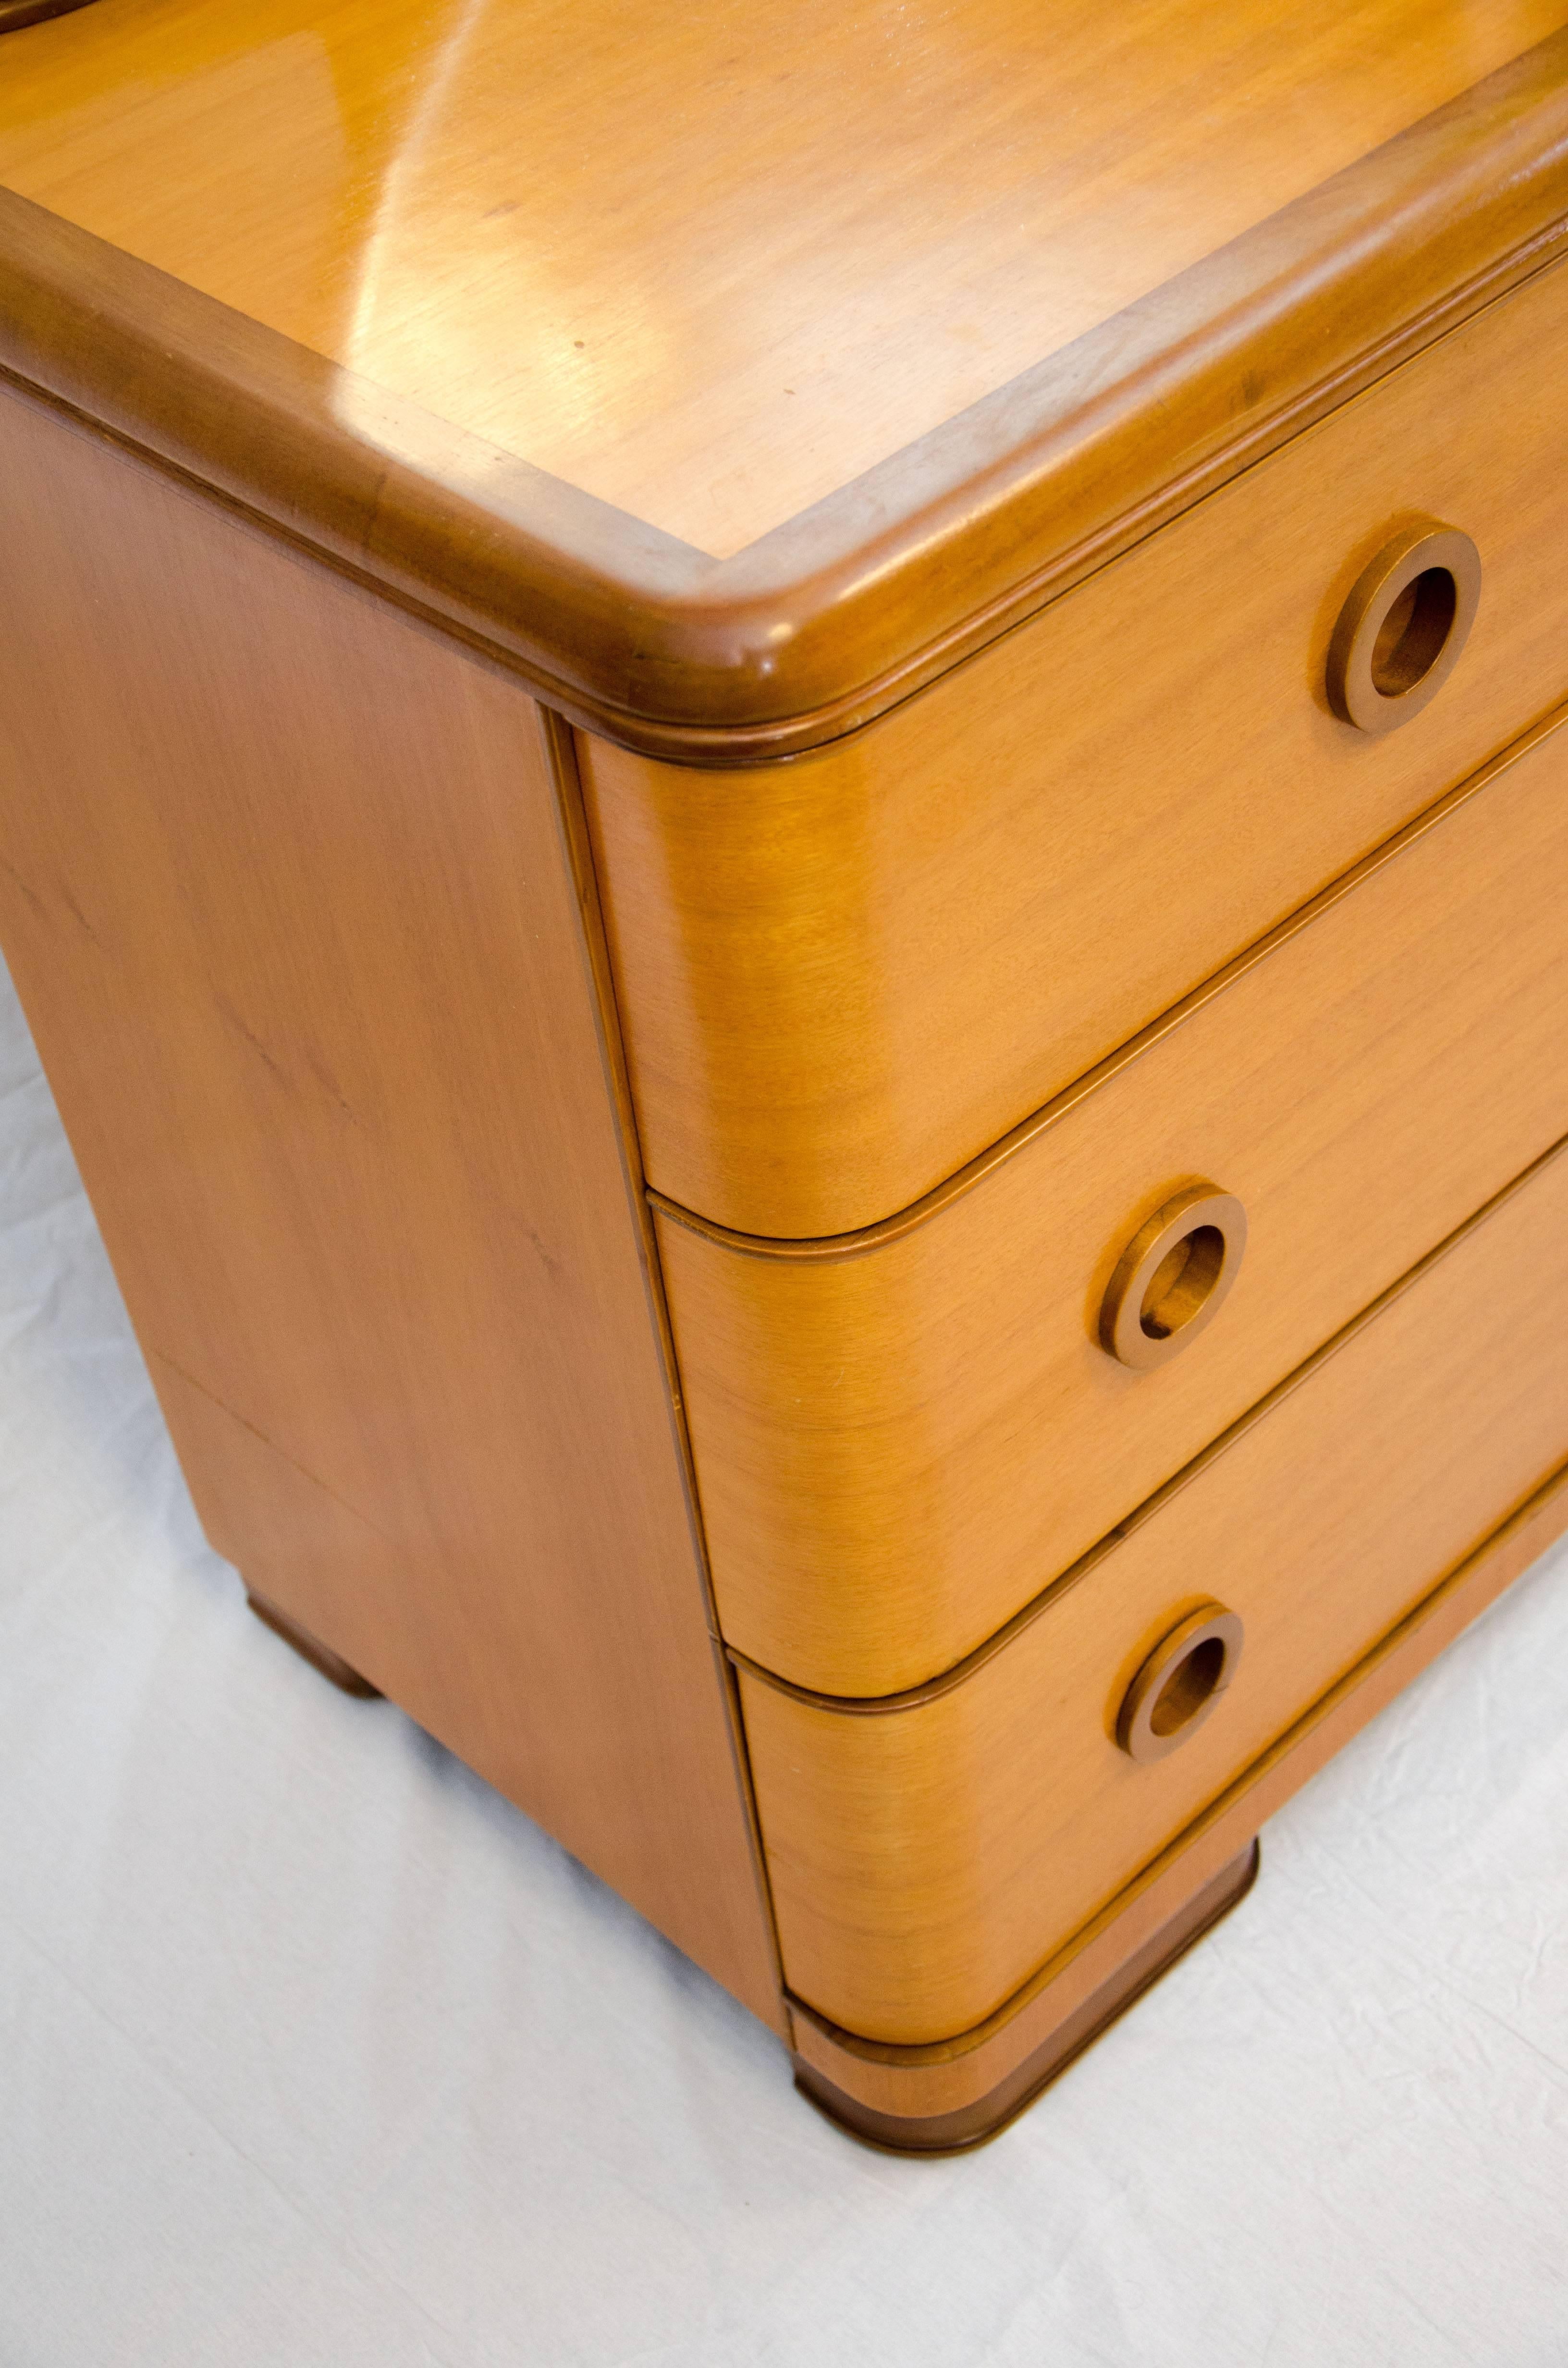  Blonde mahogany dresser with darker accents, rounded edges, inset circular drawer pulls, and a round mirror with a wooden frame (mirror height is 68